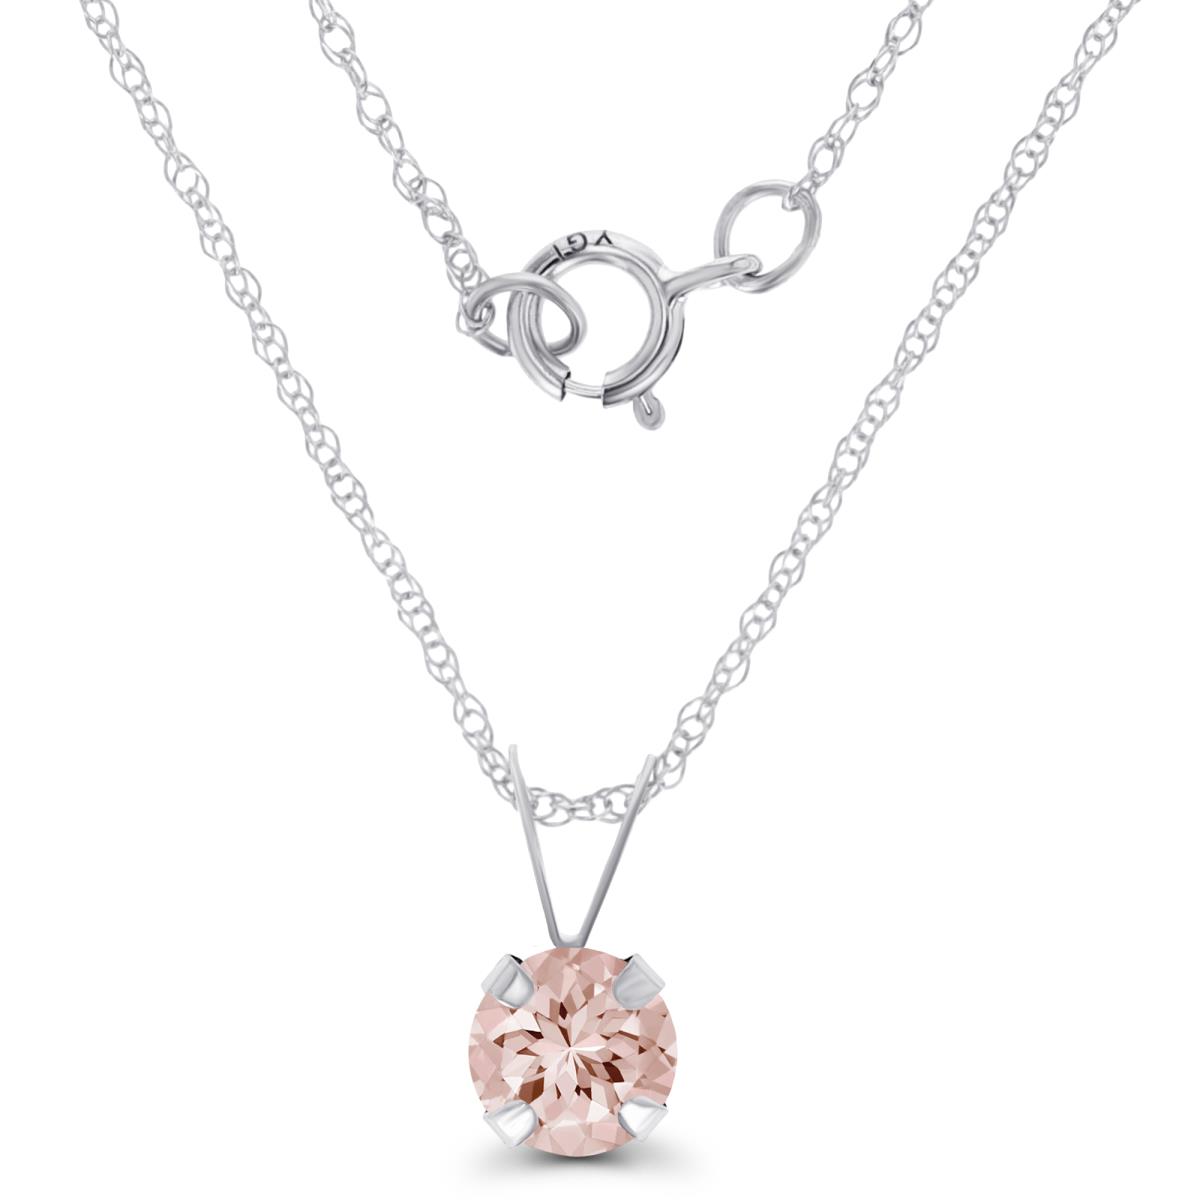 14K White Gold 5mm Round Morganite 18" Rope Chain Necklace